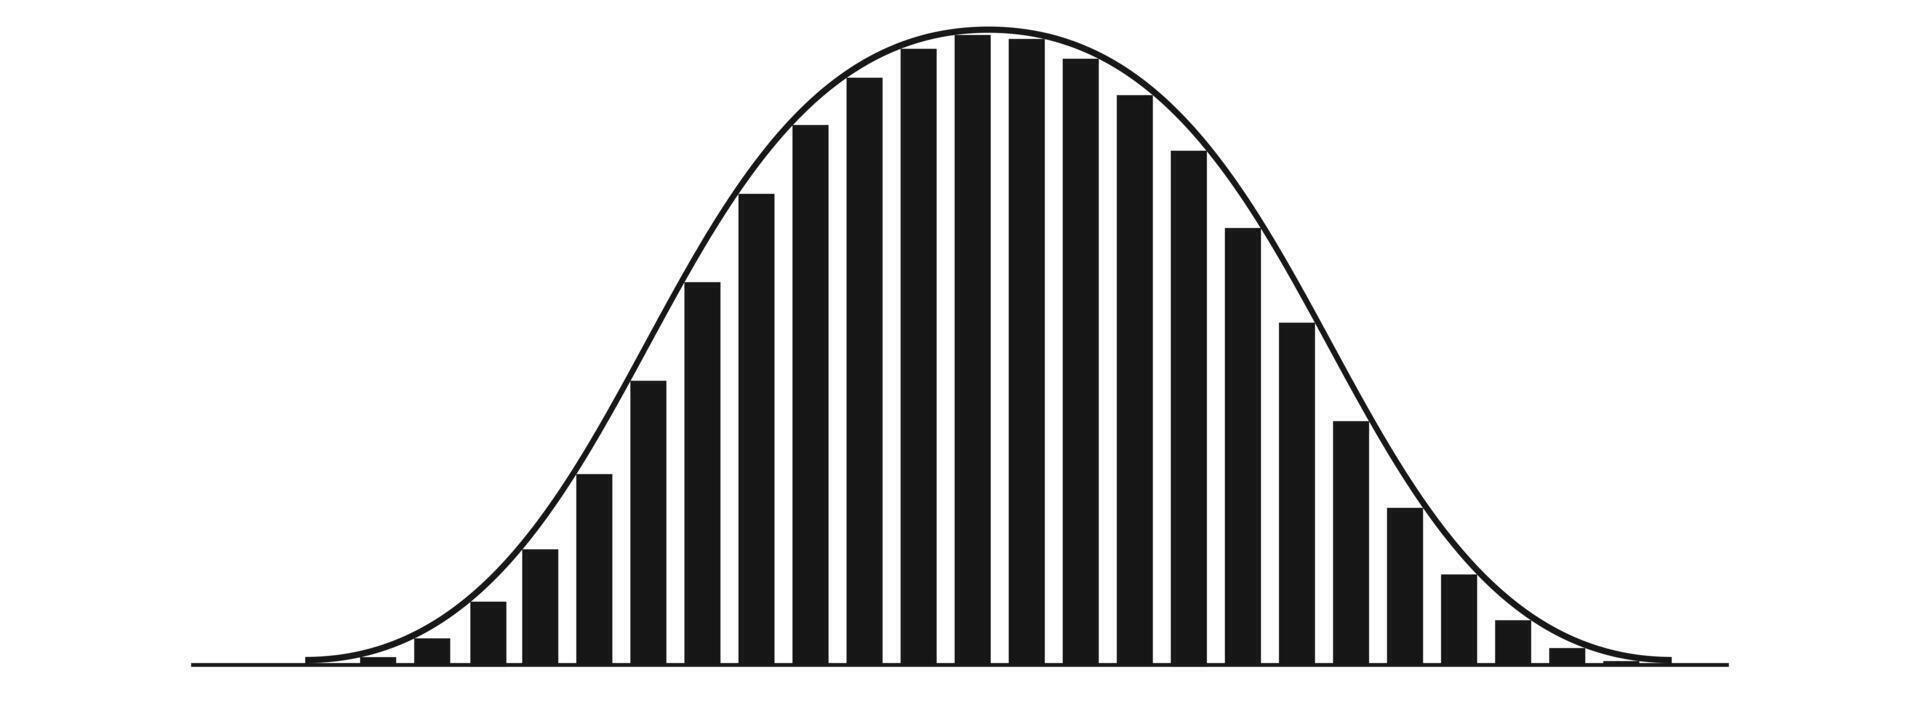 Gaussian or normal distribution histogram. Bell curve template with columns. Probability theory concept. Layout for financial, statistics or logistic data. vector